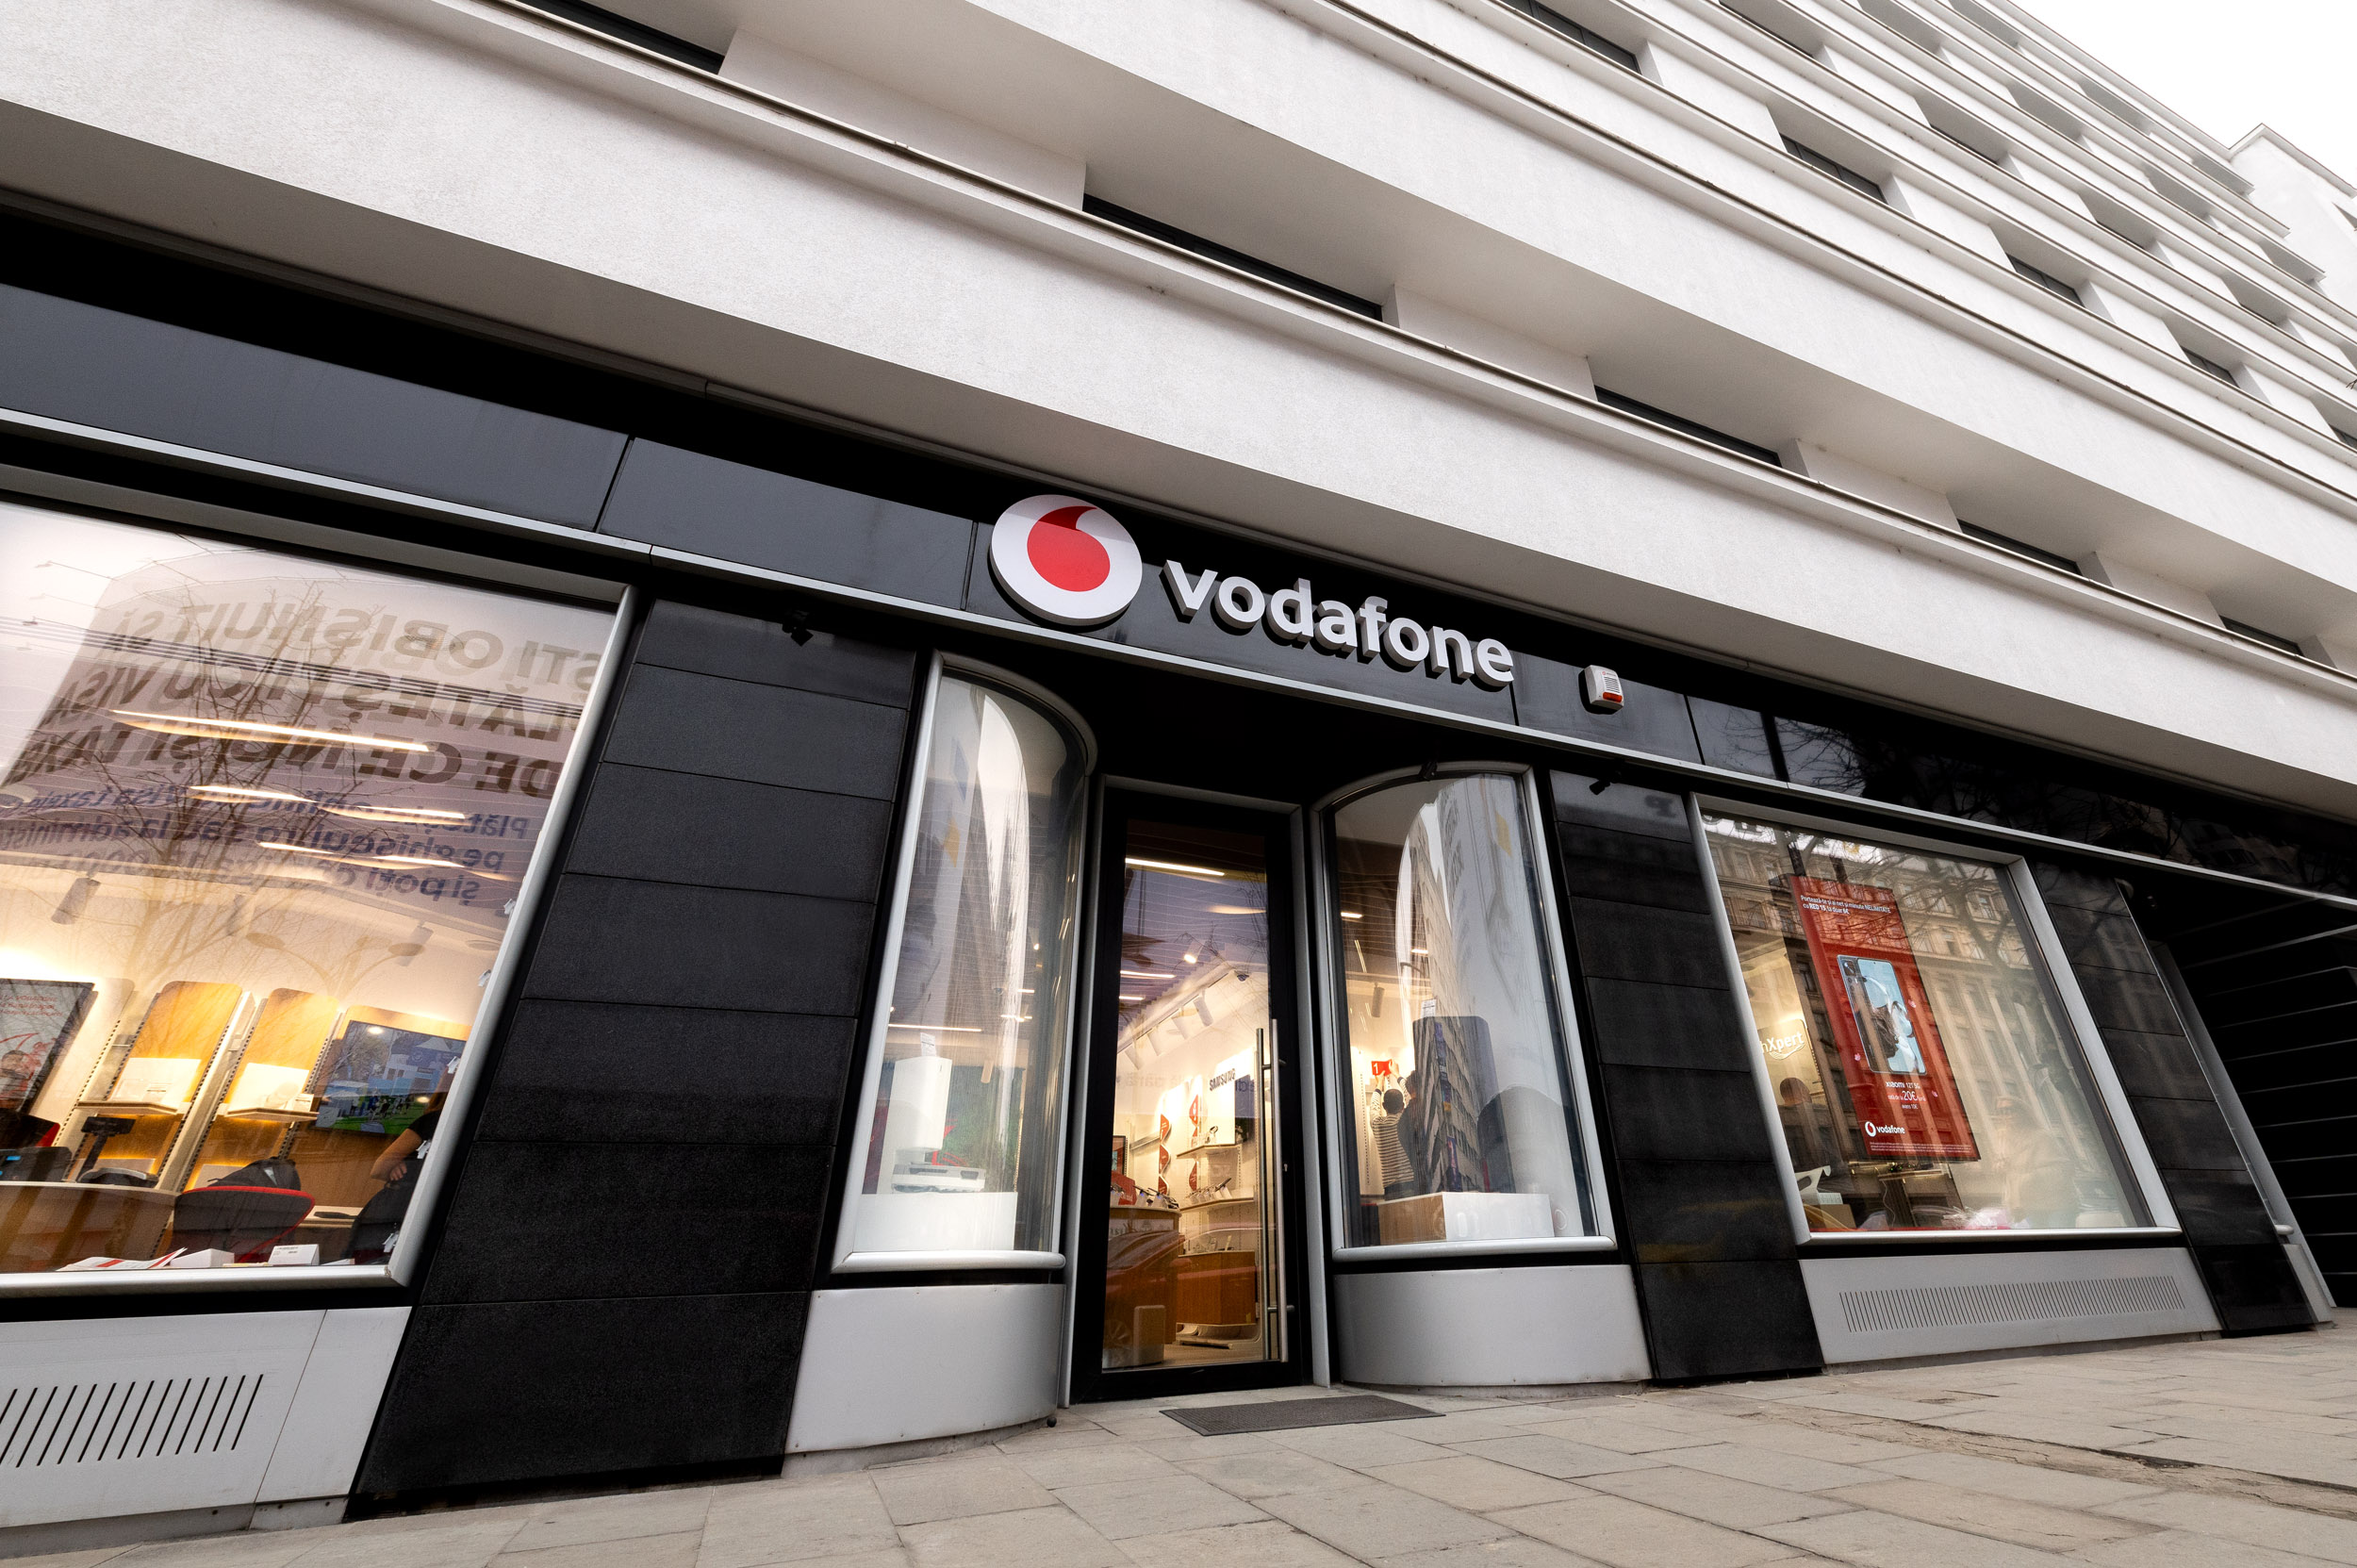 Vodafone opened the first EasyTech store